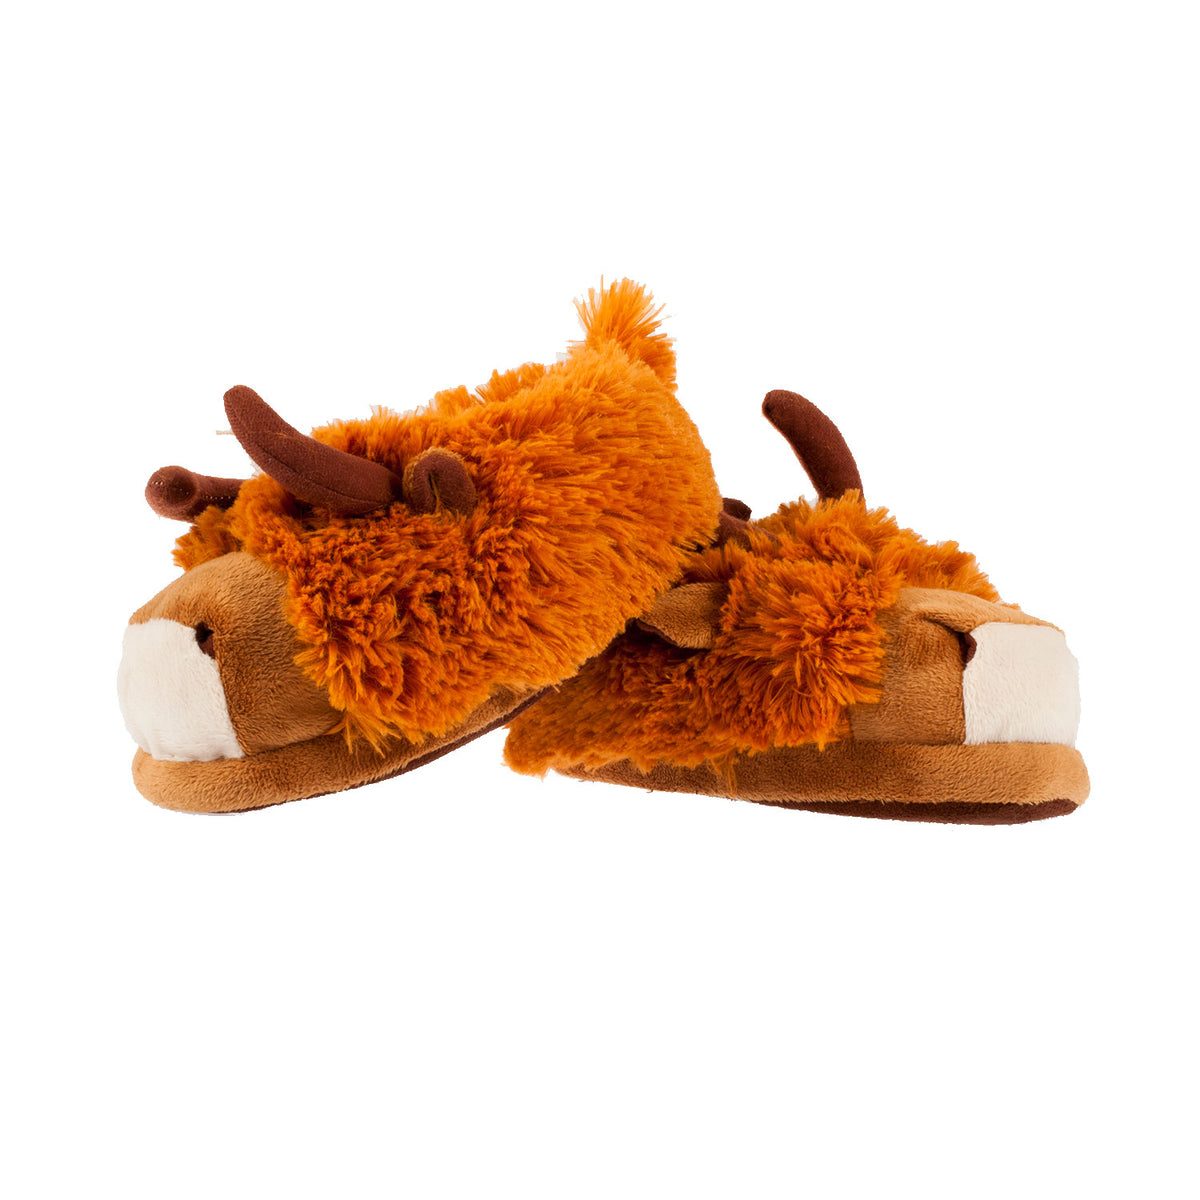 Highland Cow Plush Highland Cow Slipperss Brown Scottish Cattle Highland  Cow Slippers For Winter Warmth And Kawaii Animal Style Perfect Adult  Plouchie Gift 230227 From Cong05, $16.85 | DHgate.Com